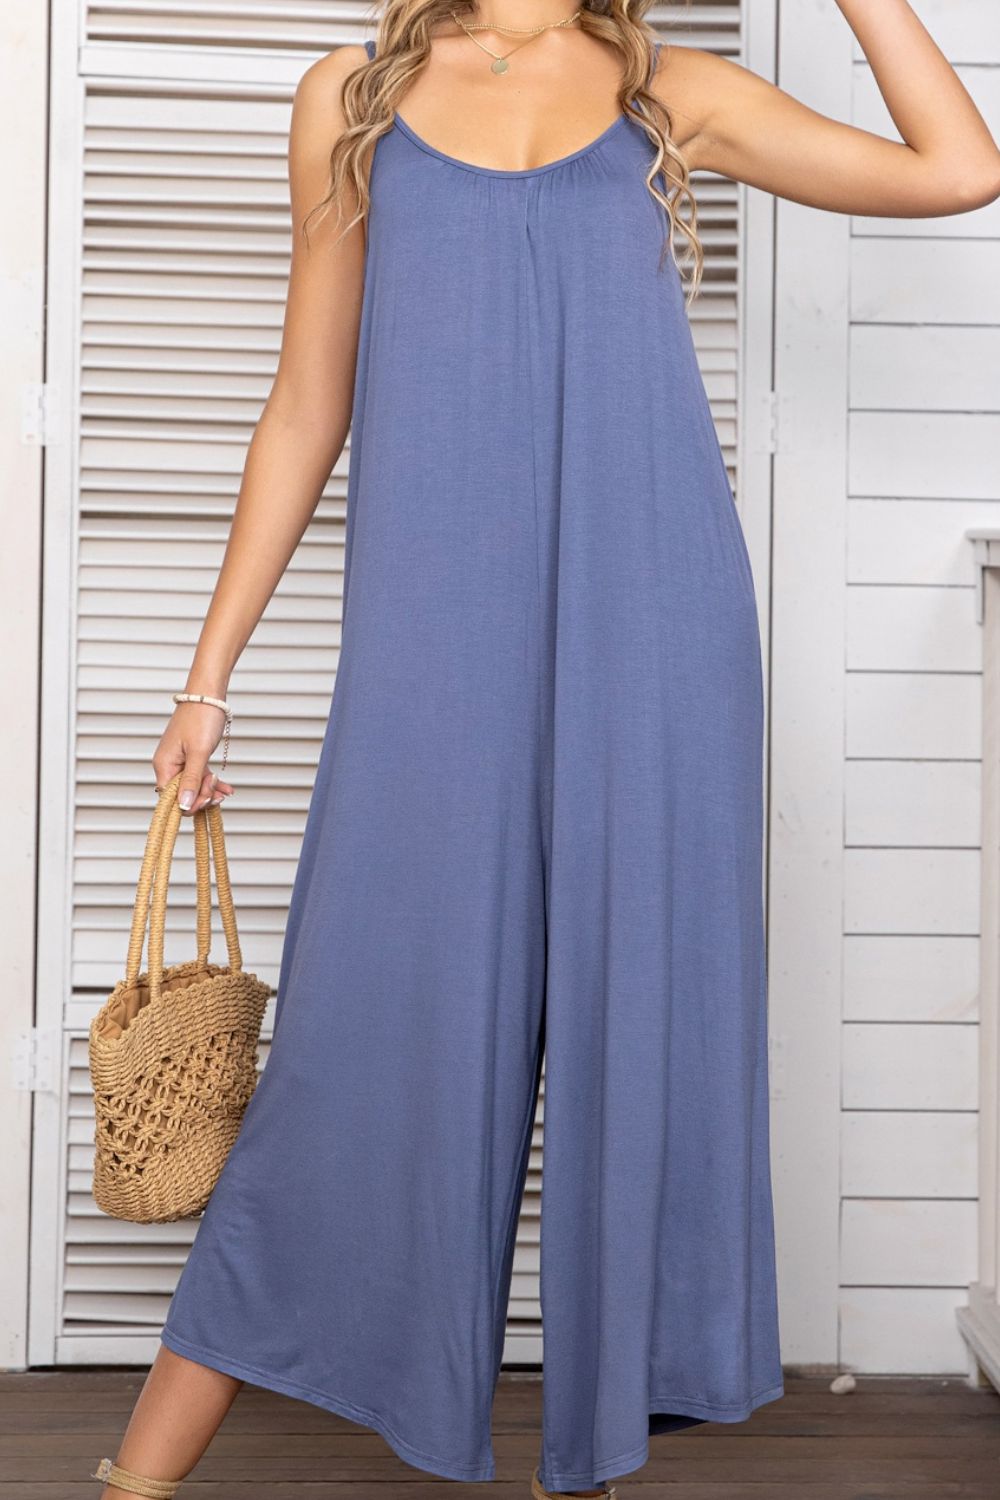 Spaghetti Strap Scoop Neck Jumpsuit  Sunset and Swim Periwinkle S 